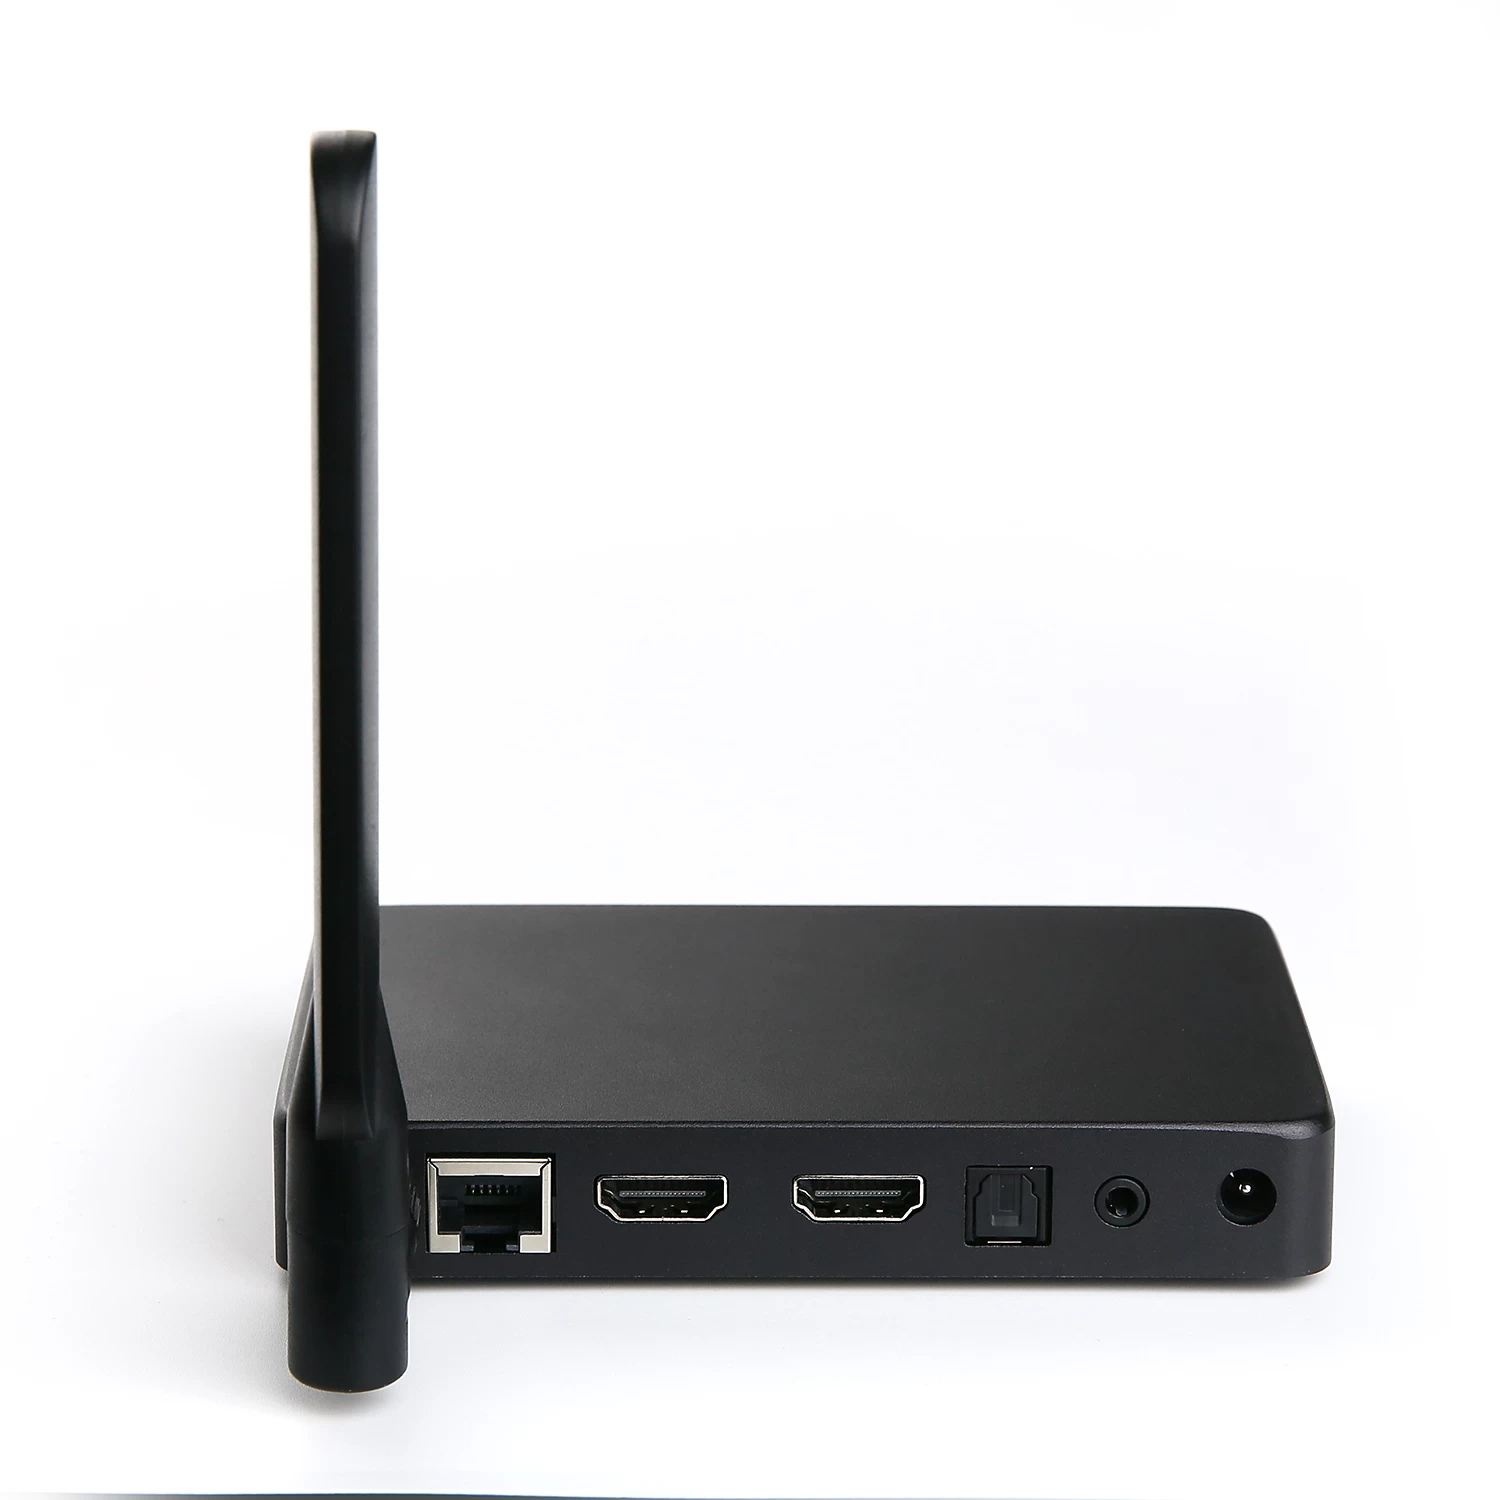 Bluetooth 4.0 Android Smart TV Box, Meilleur Android TV Box HDMI